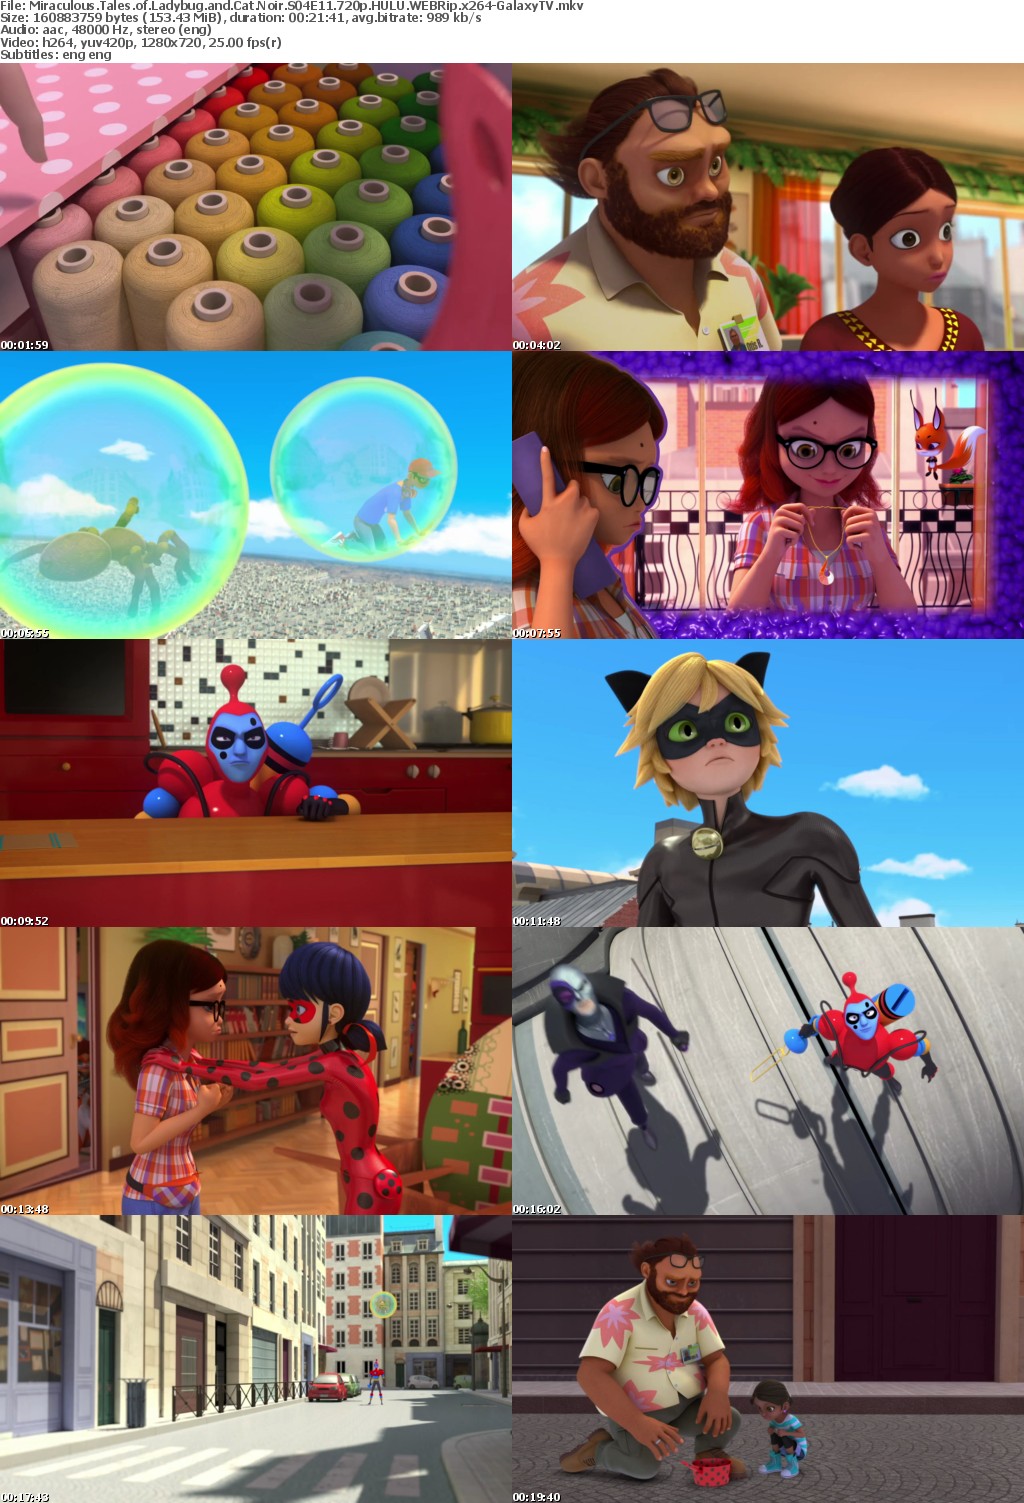 Miraculous Tales of Ladybug and Cat Noir S04 COMPLETE 720p HULU WEBRip x264-GalaxyTV